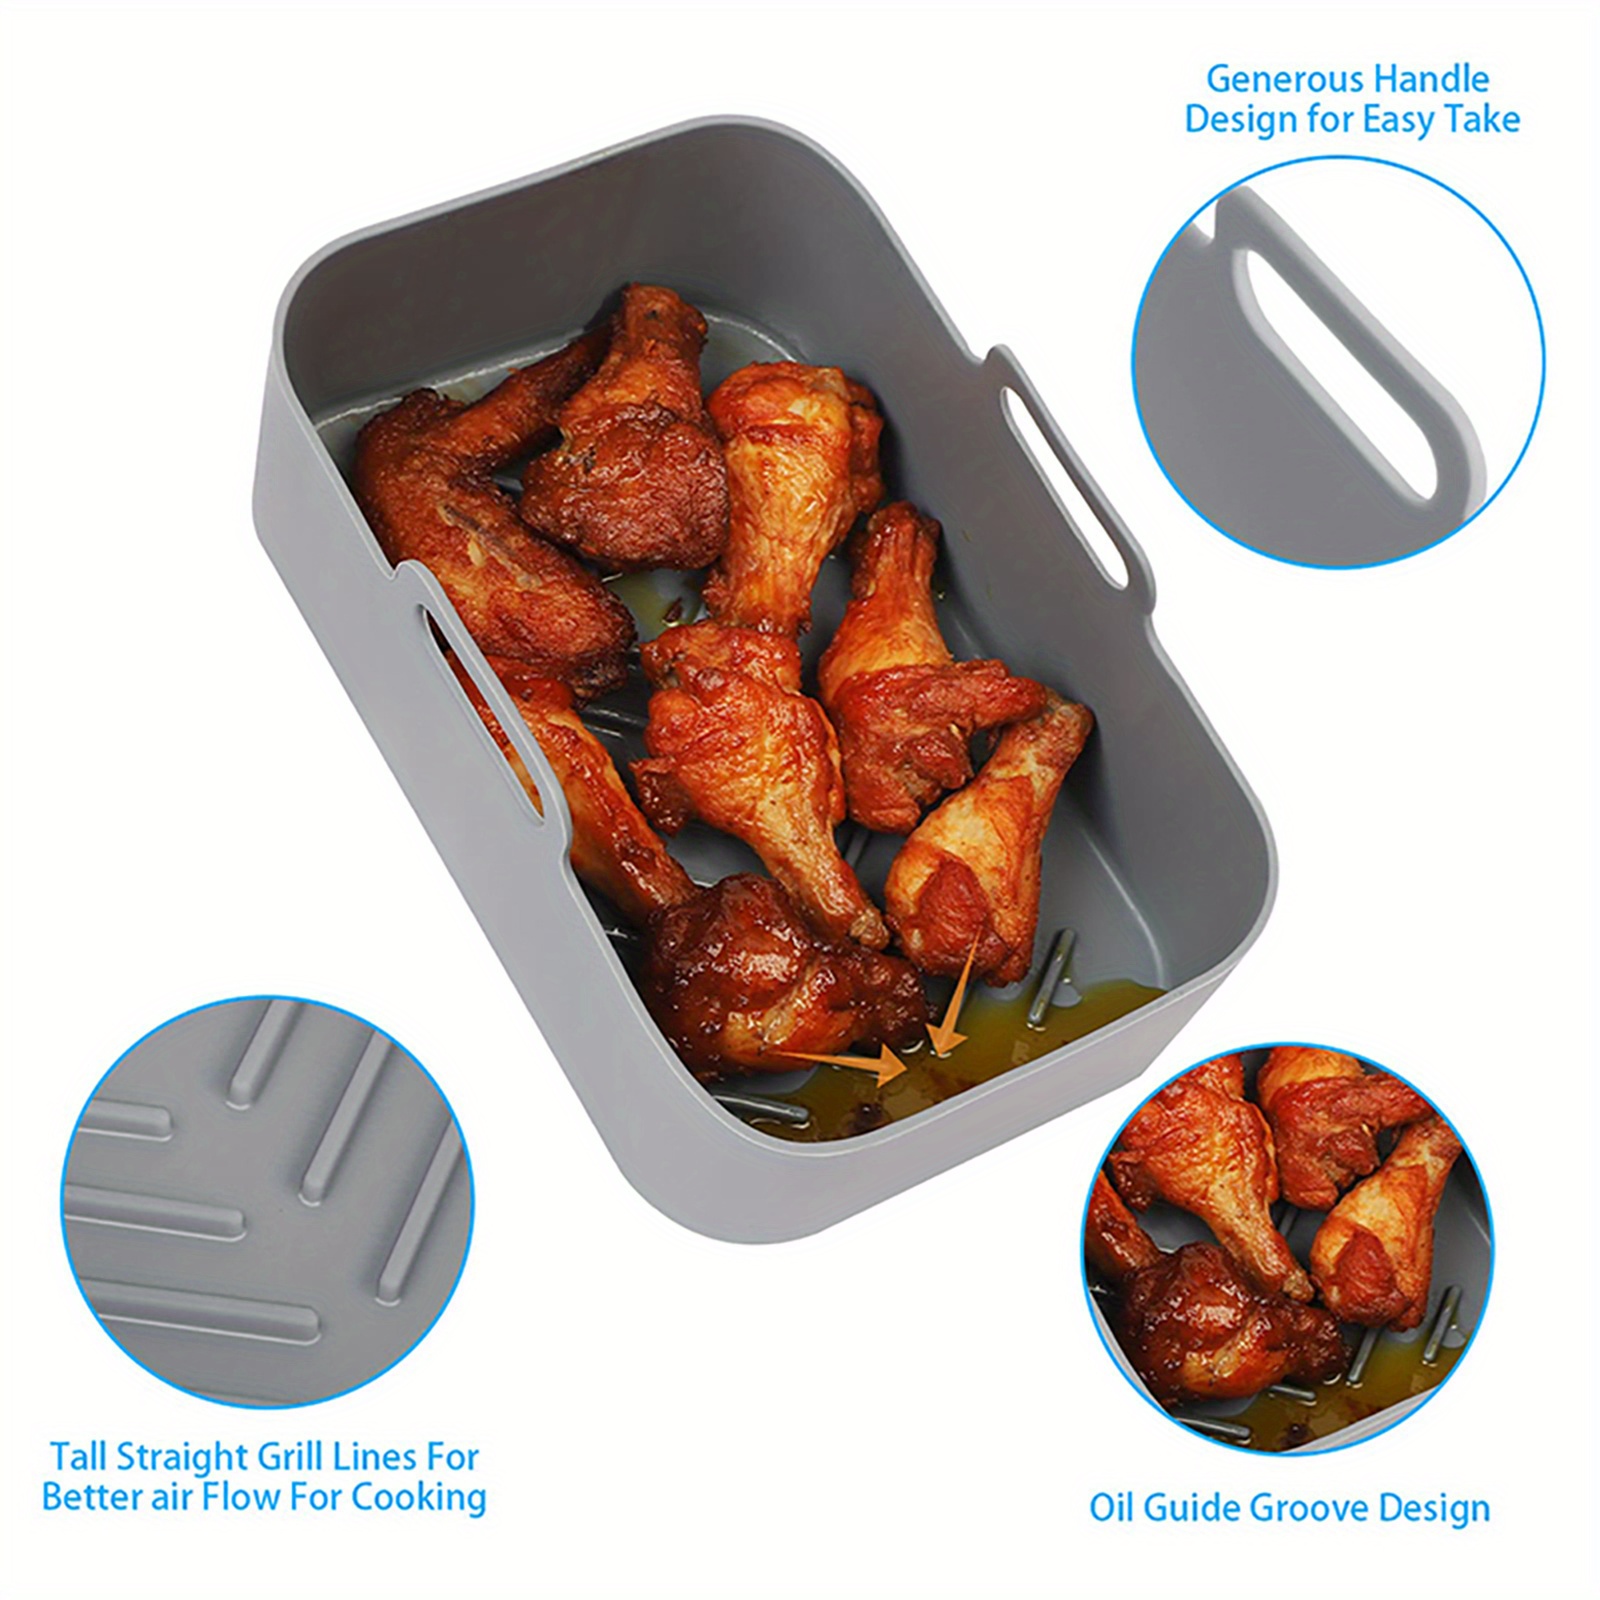  2Pcs Air Fryer Silicone Liners Rectangular for Ninja Foodi Dual  DZ201 8QT/DZ090 6QT, MMH Reusable Airfryer Pot Replacement Baking Tray  Basket Insert, Non-stick, Easy Cleaning, Food Safe